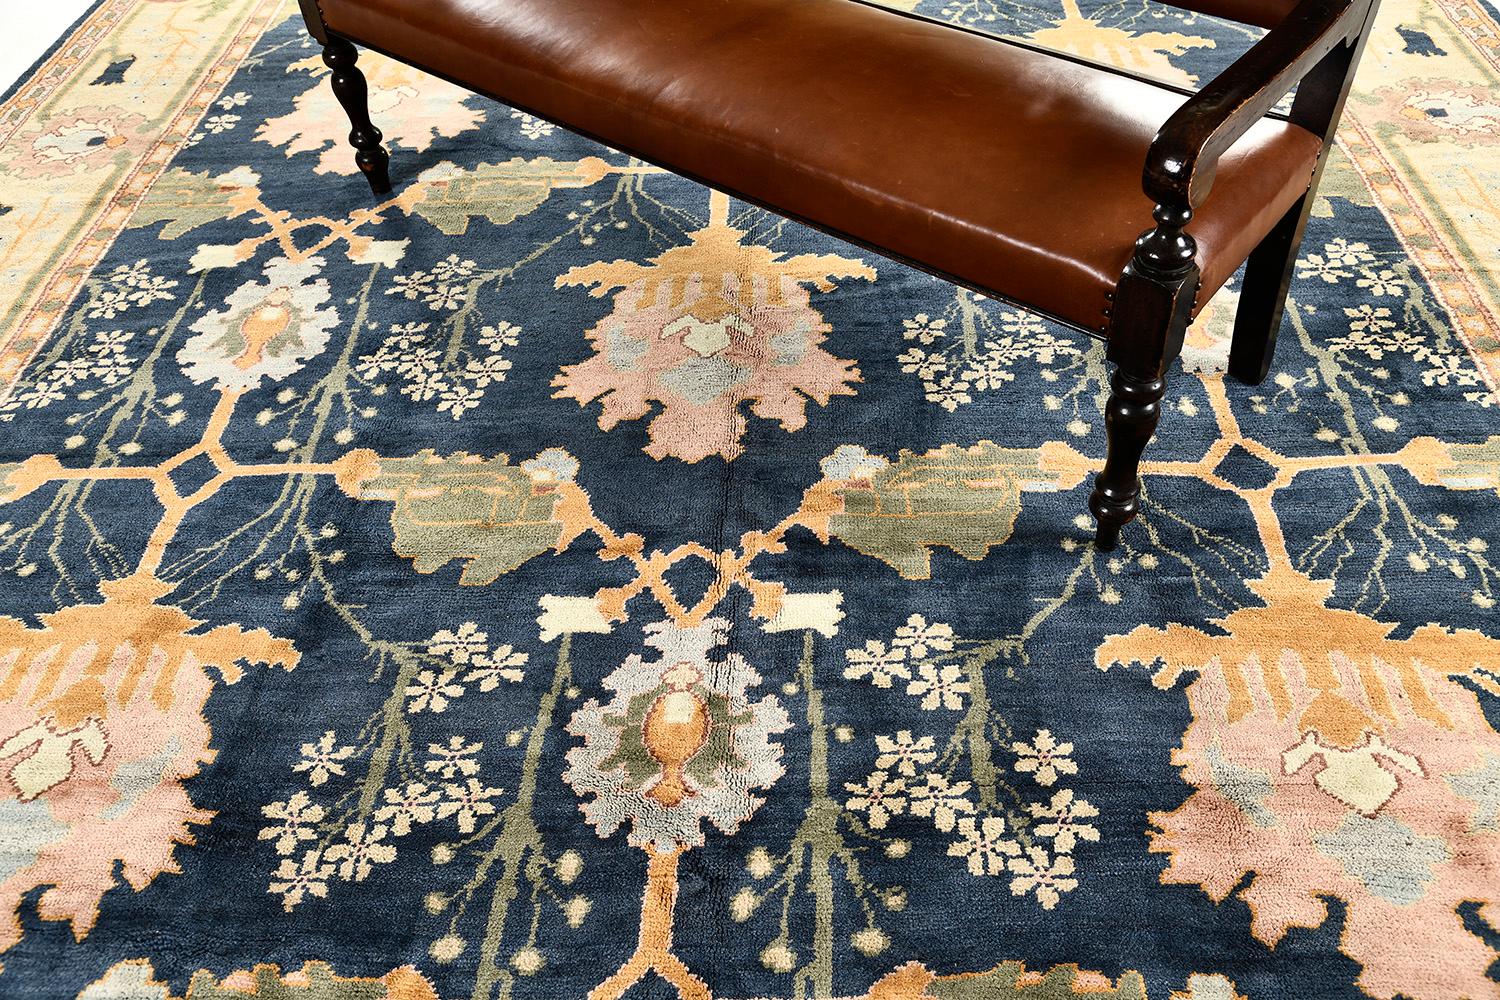 Refurbish your little sanctuary with our recreated Donegal Design rug made out of wool. All the blooming embellishments and elements blend and formed into a stunning panel pattern. Its earthy tone palette added to the individuality and elegance of